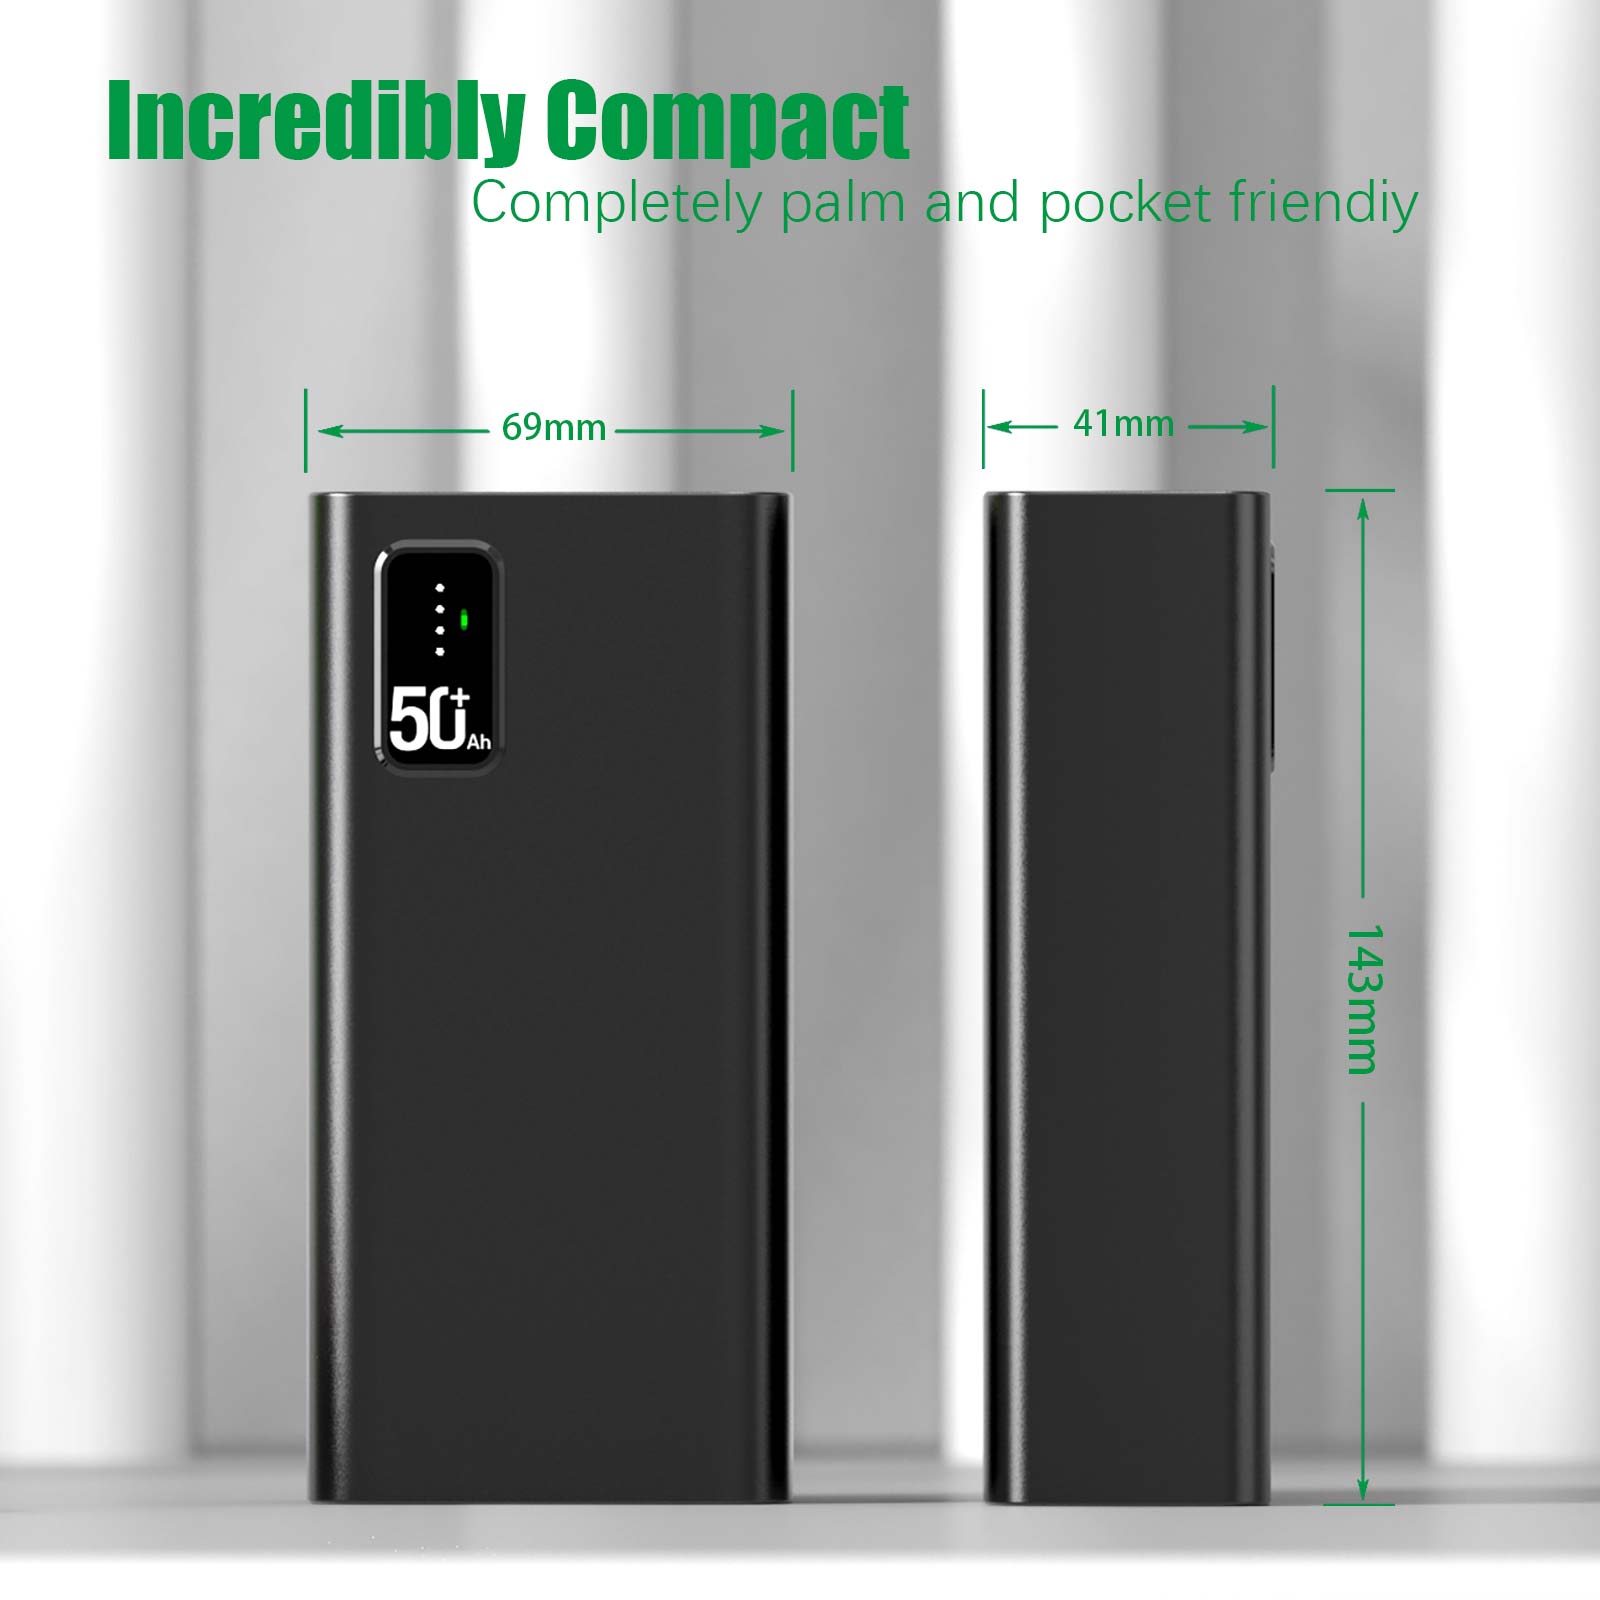 Toospon Power Bank, USB 22.5W & Type-C PD20W Phone Portable Charger 50000mah External Battery, 2 Inputs & 5 Outputs Quick Charge For iphone, ipad, Samsung, Huawei, Smartphones Speaker etc.